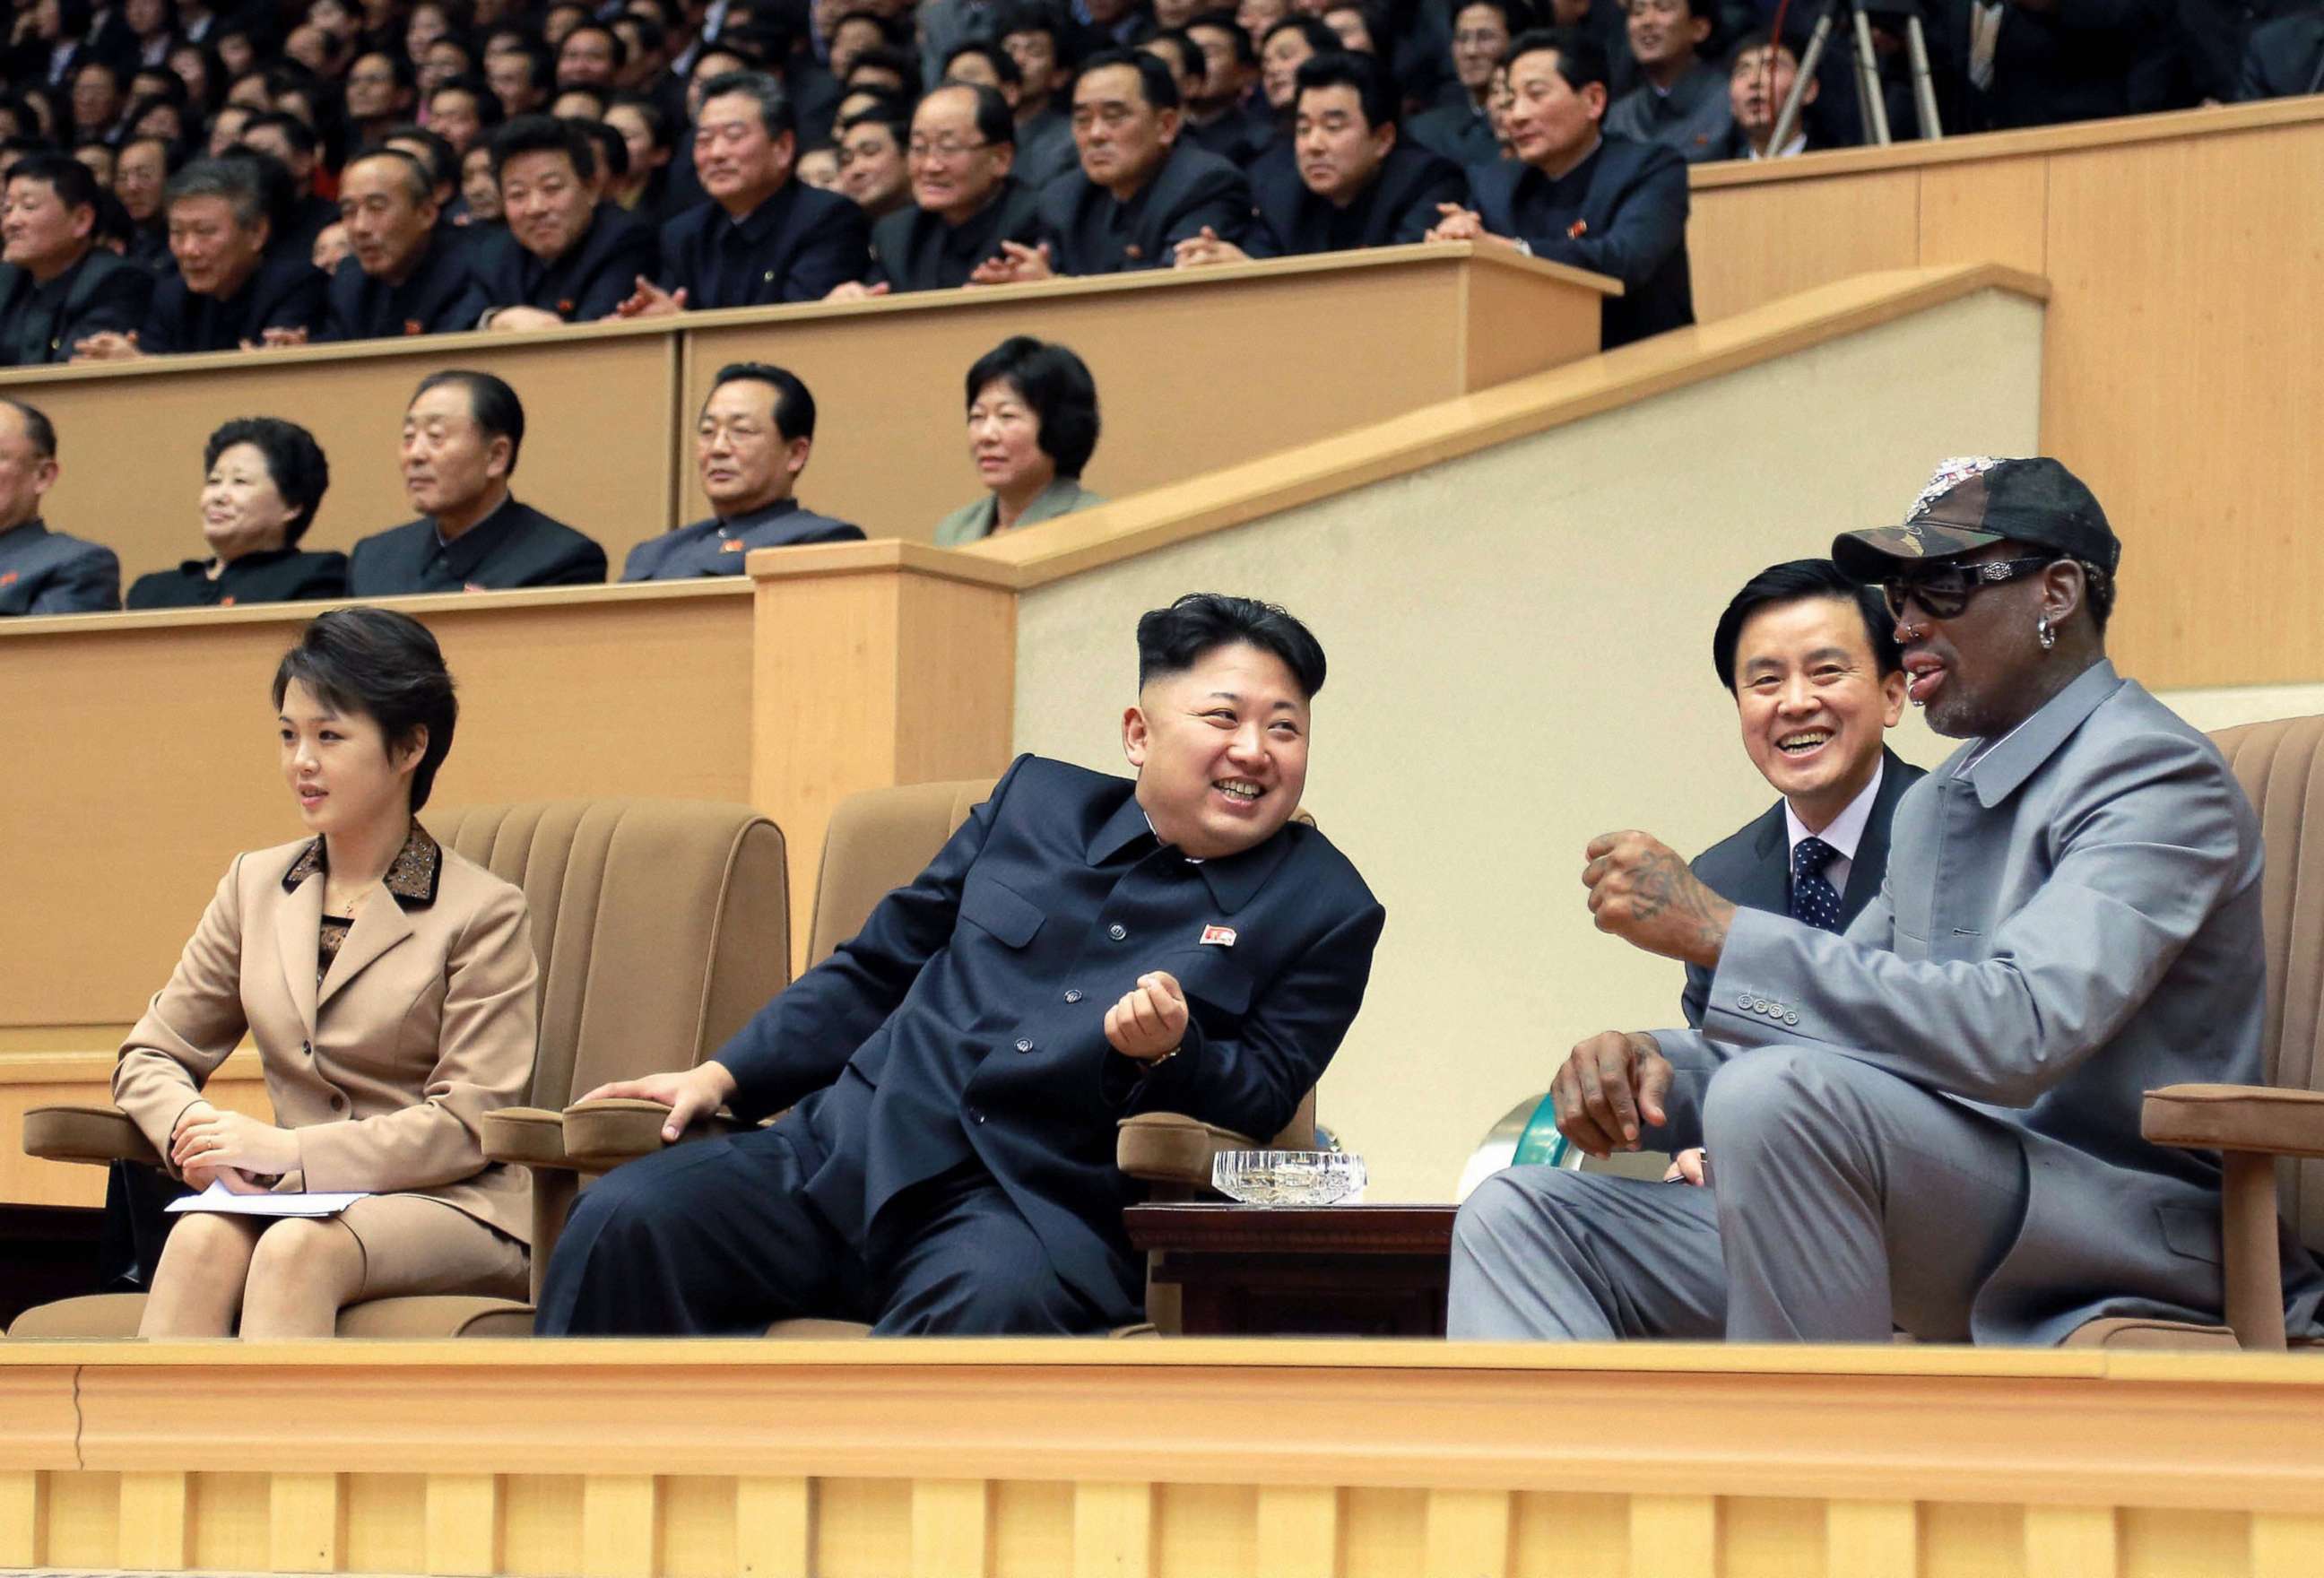 PHOTO: Former basketball star Dennis Rodman, right, and North Korean leader Kim Jong Un, 2nd from left, watch a basketball game between American and North Korean players at the Pyongyang Indoor Stadium on Jan. 8, 2014.